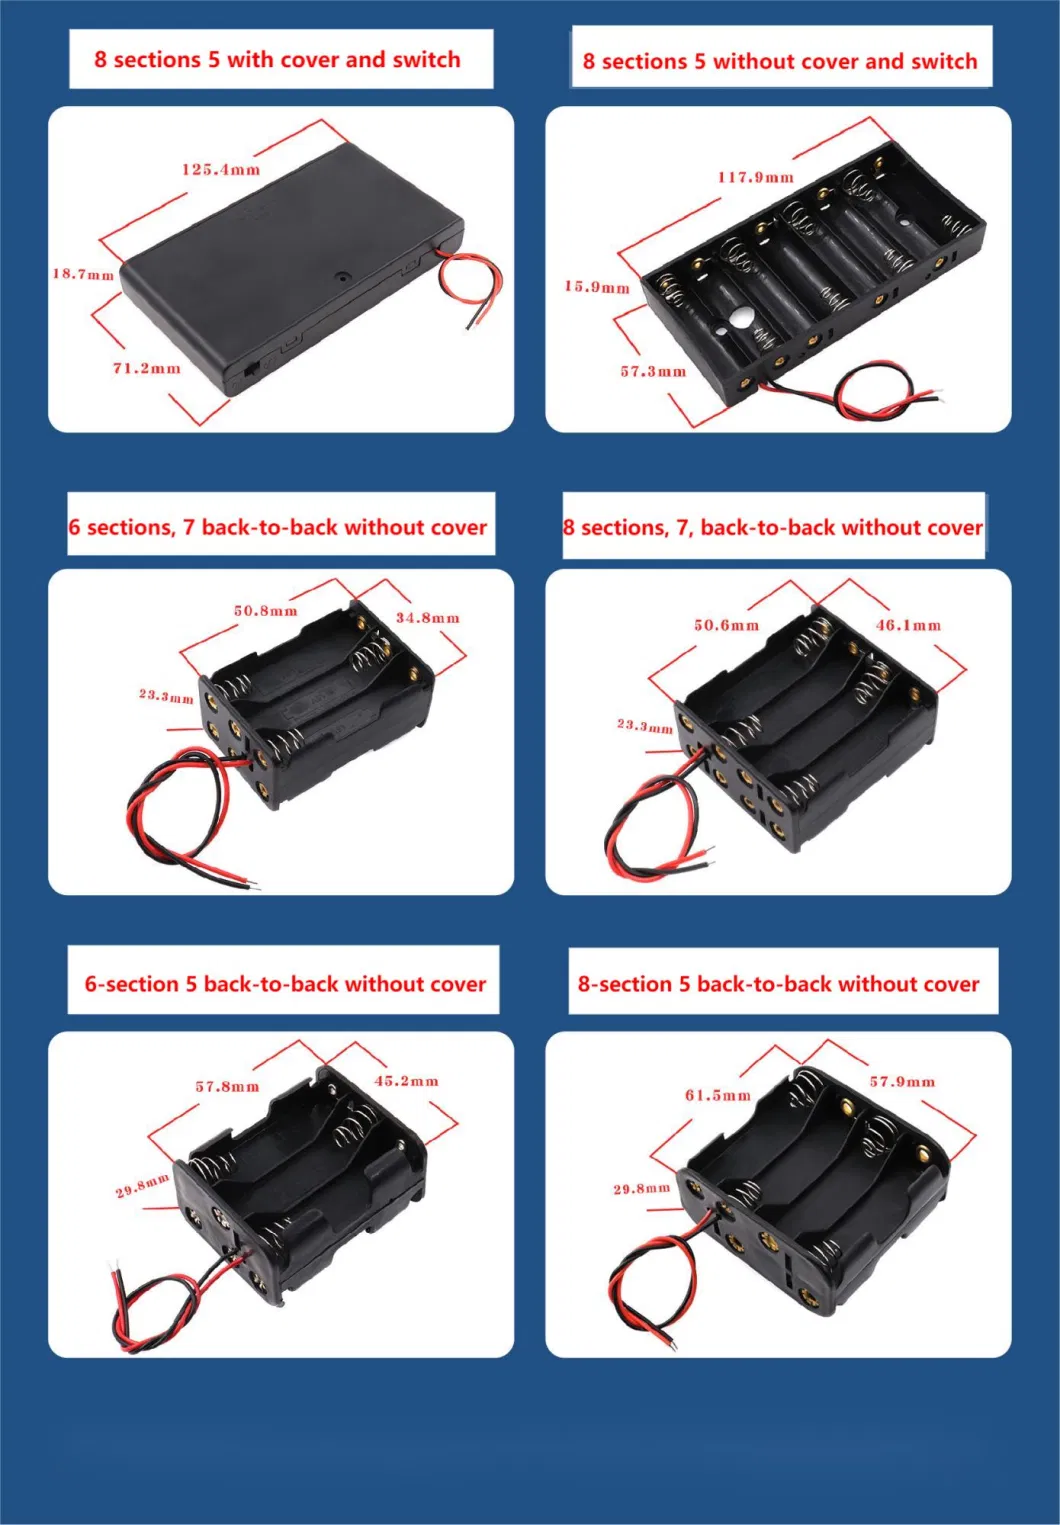 Battery Holder with Switch for 5 AA Batteries, Compatible with 18650 Battery, 1/2/37/4/6/8 Section, No Soldering Required for Series Connection, Output Voltage